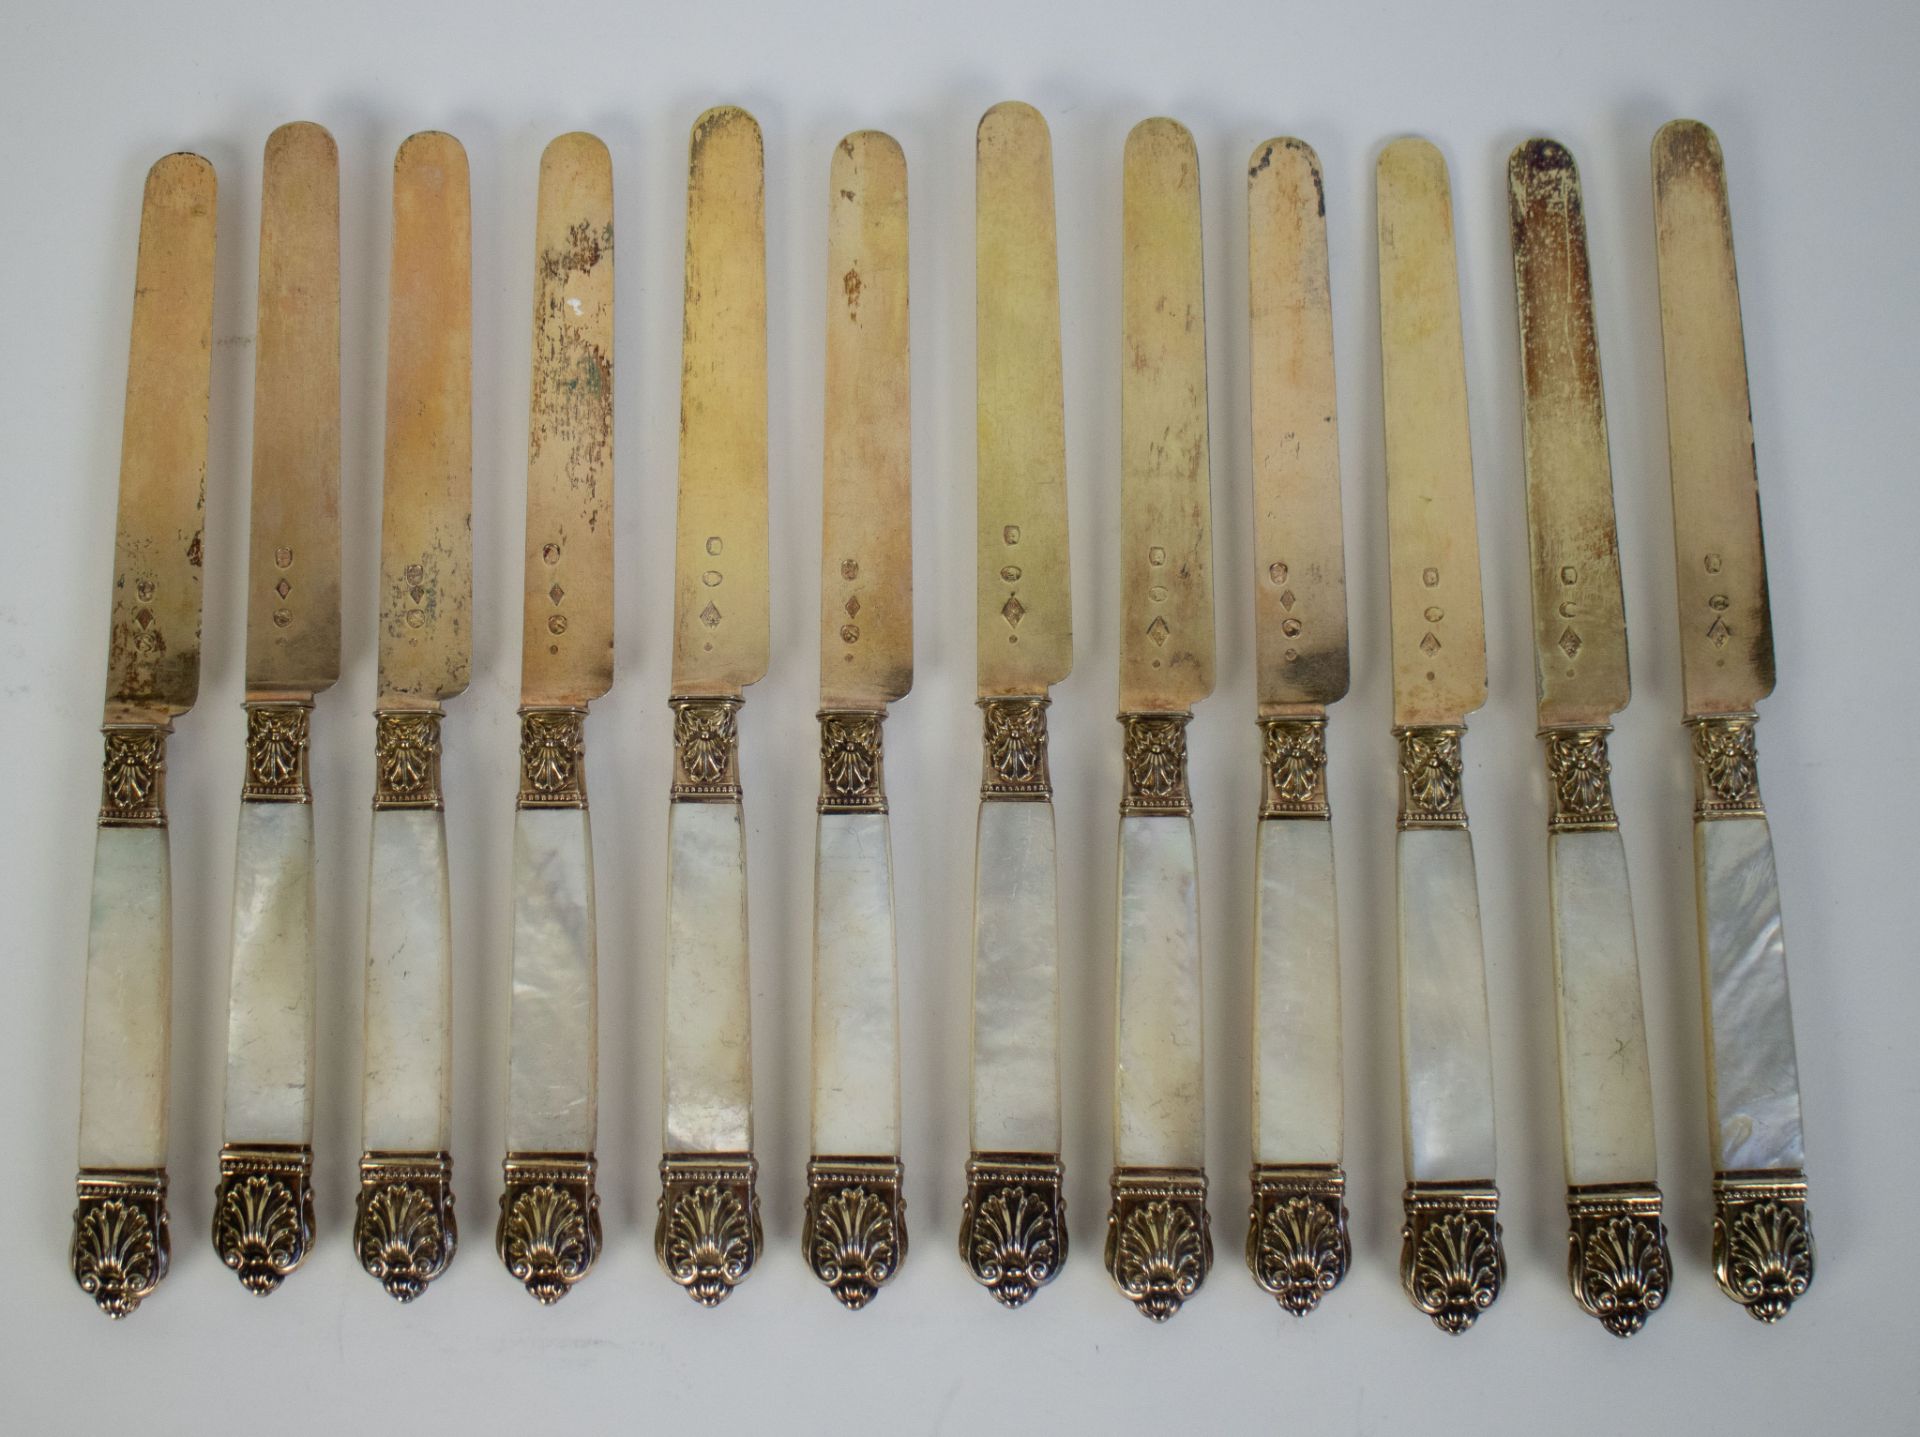 12 blades with vermeille and mother-of-pearl